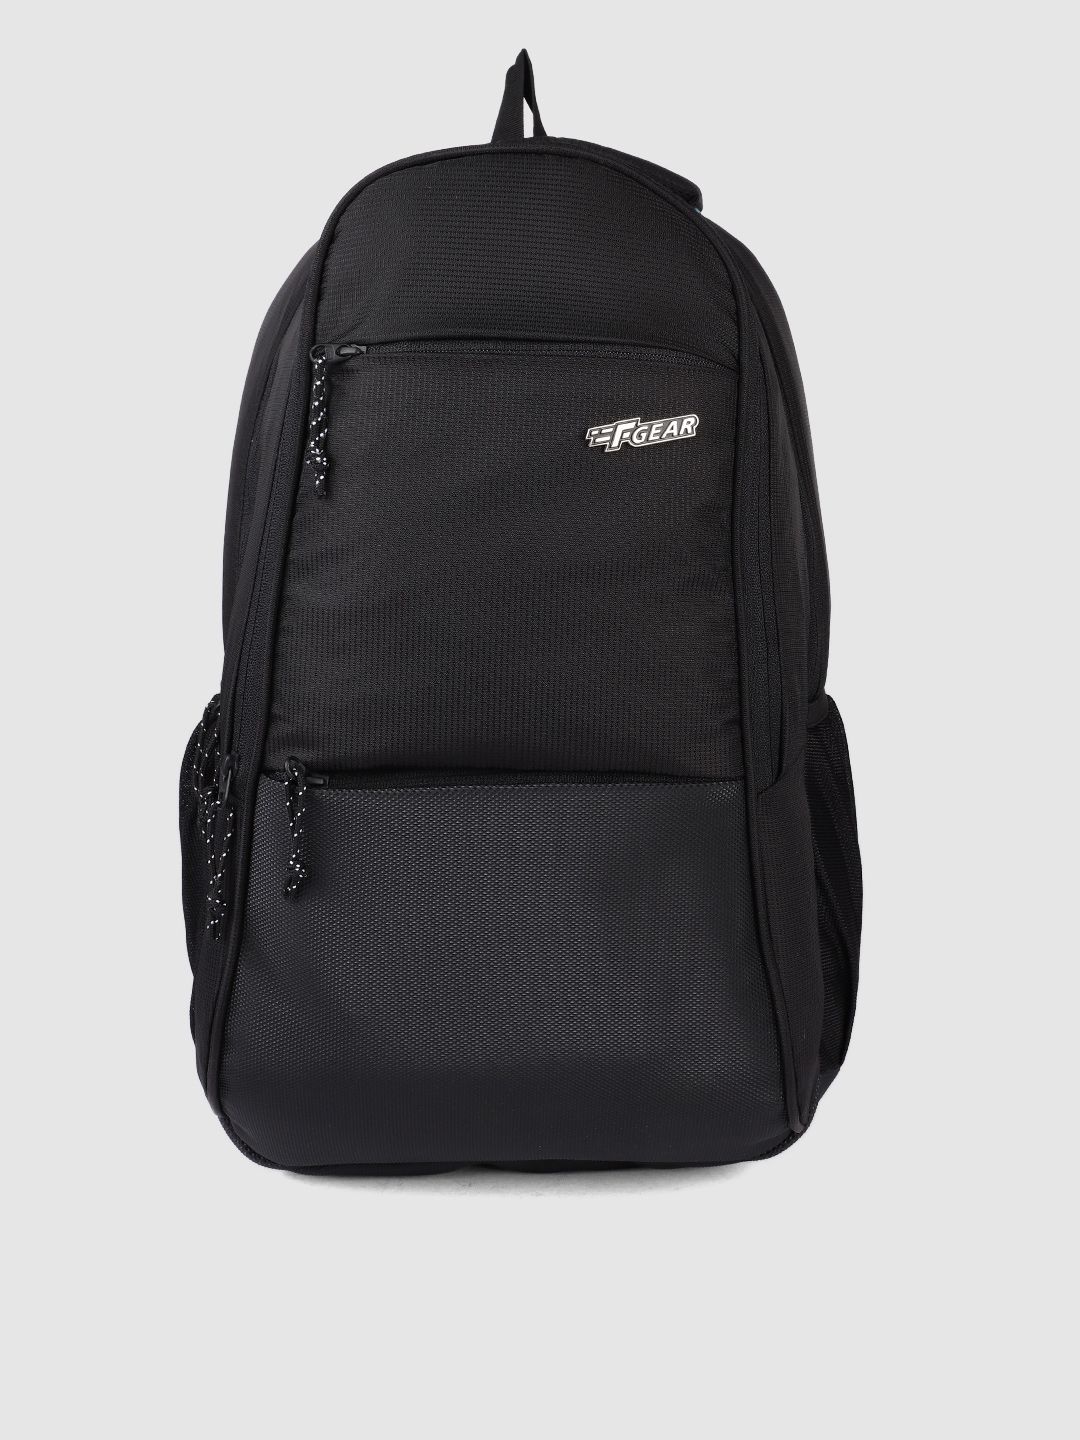 F Gear Unisex Black Arigato Solid Backpack Price in India